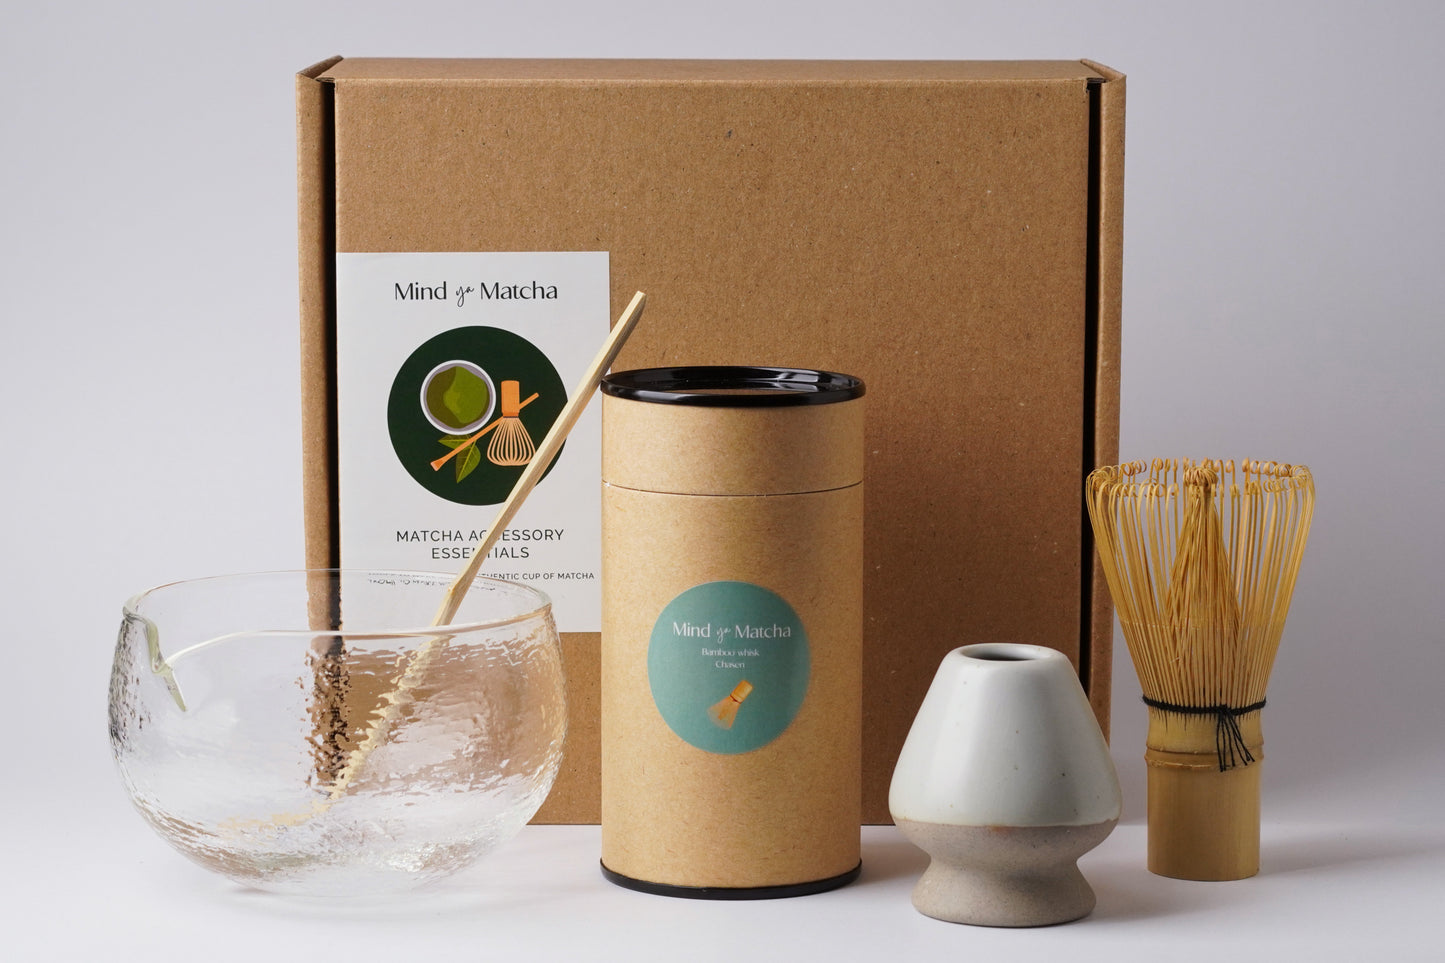 Essential Tea Set 4 Piece: Bamboo whisk, Bamboo scoop, Whisk holder and Matcha bowl